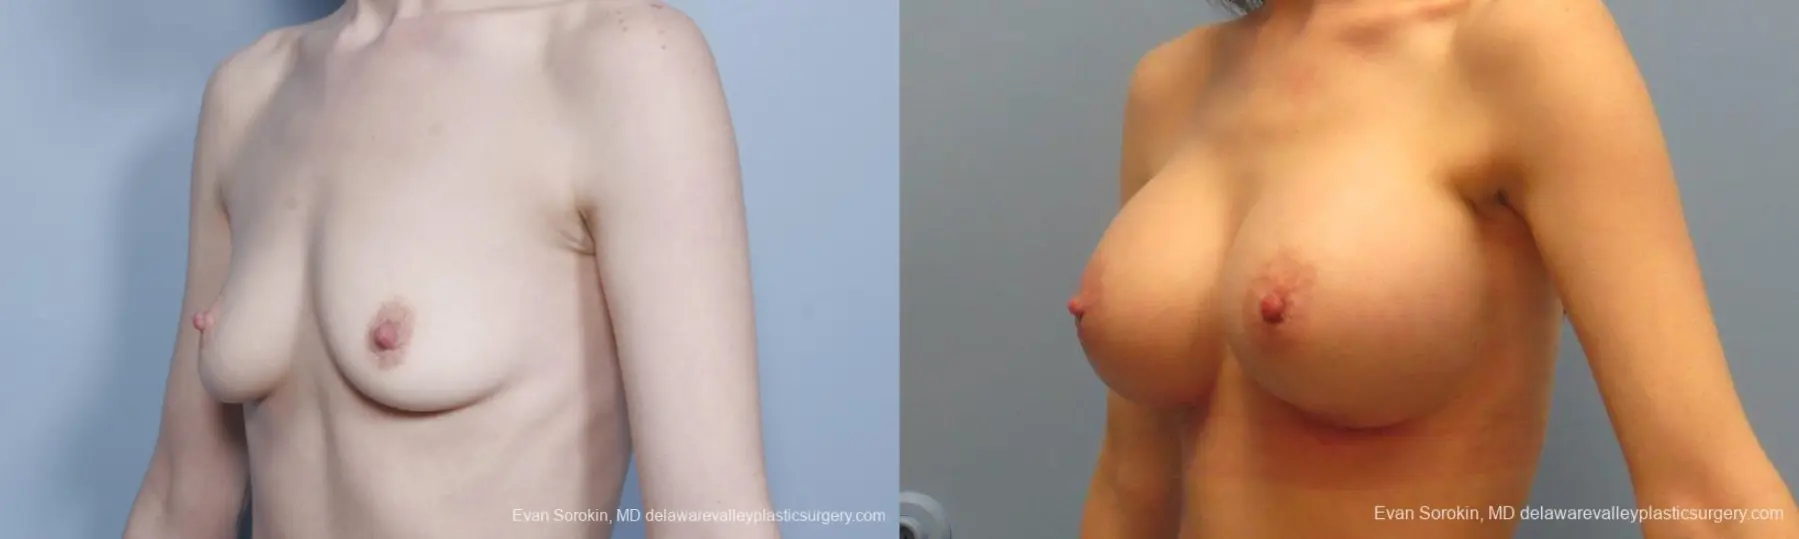 Philadelphia Breast Augmentation 8781 - Before and After 3